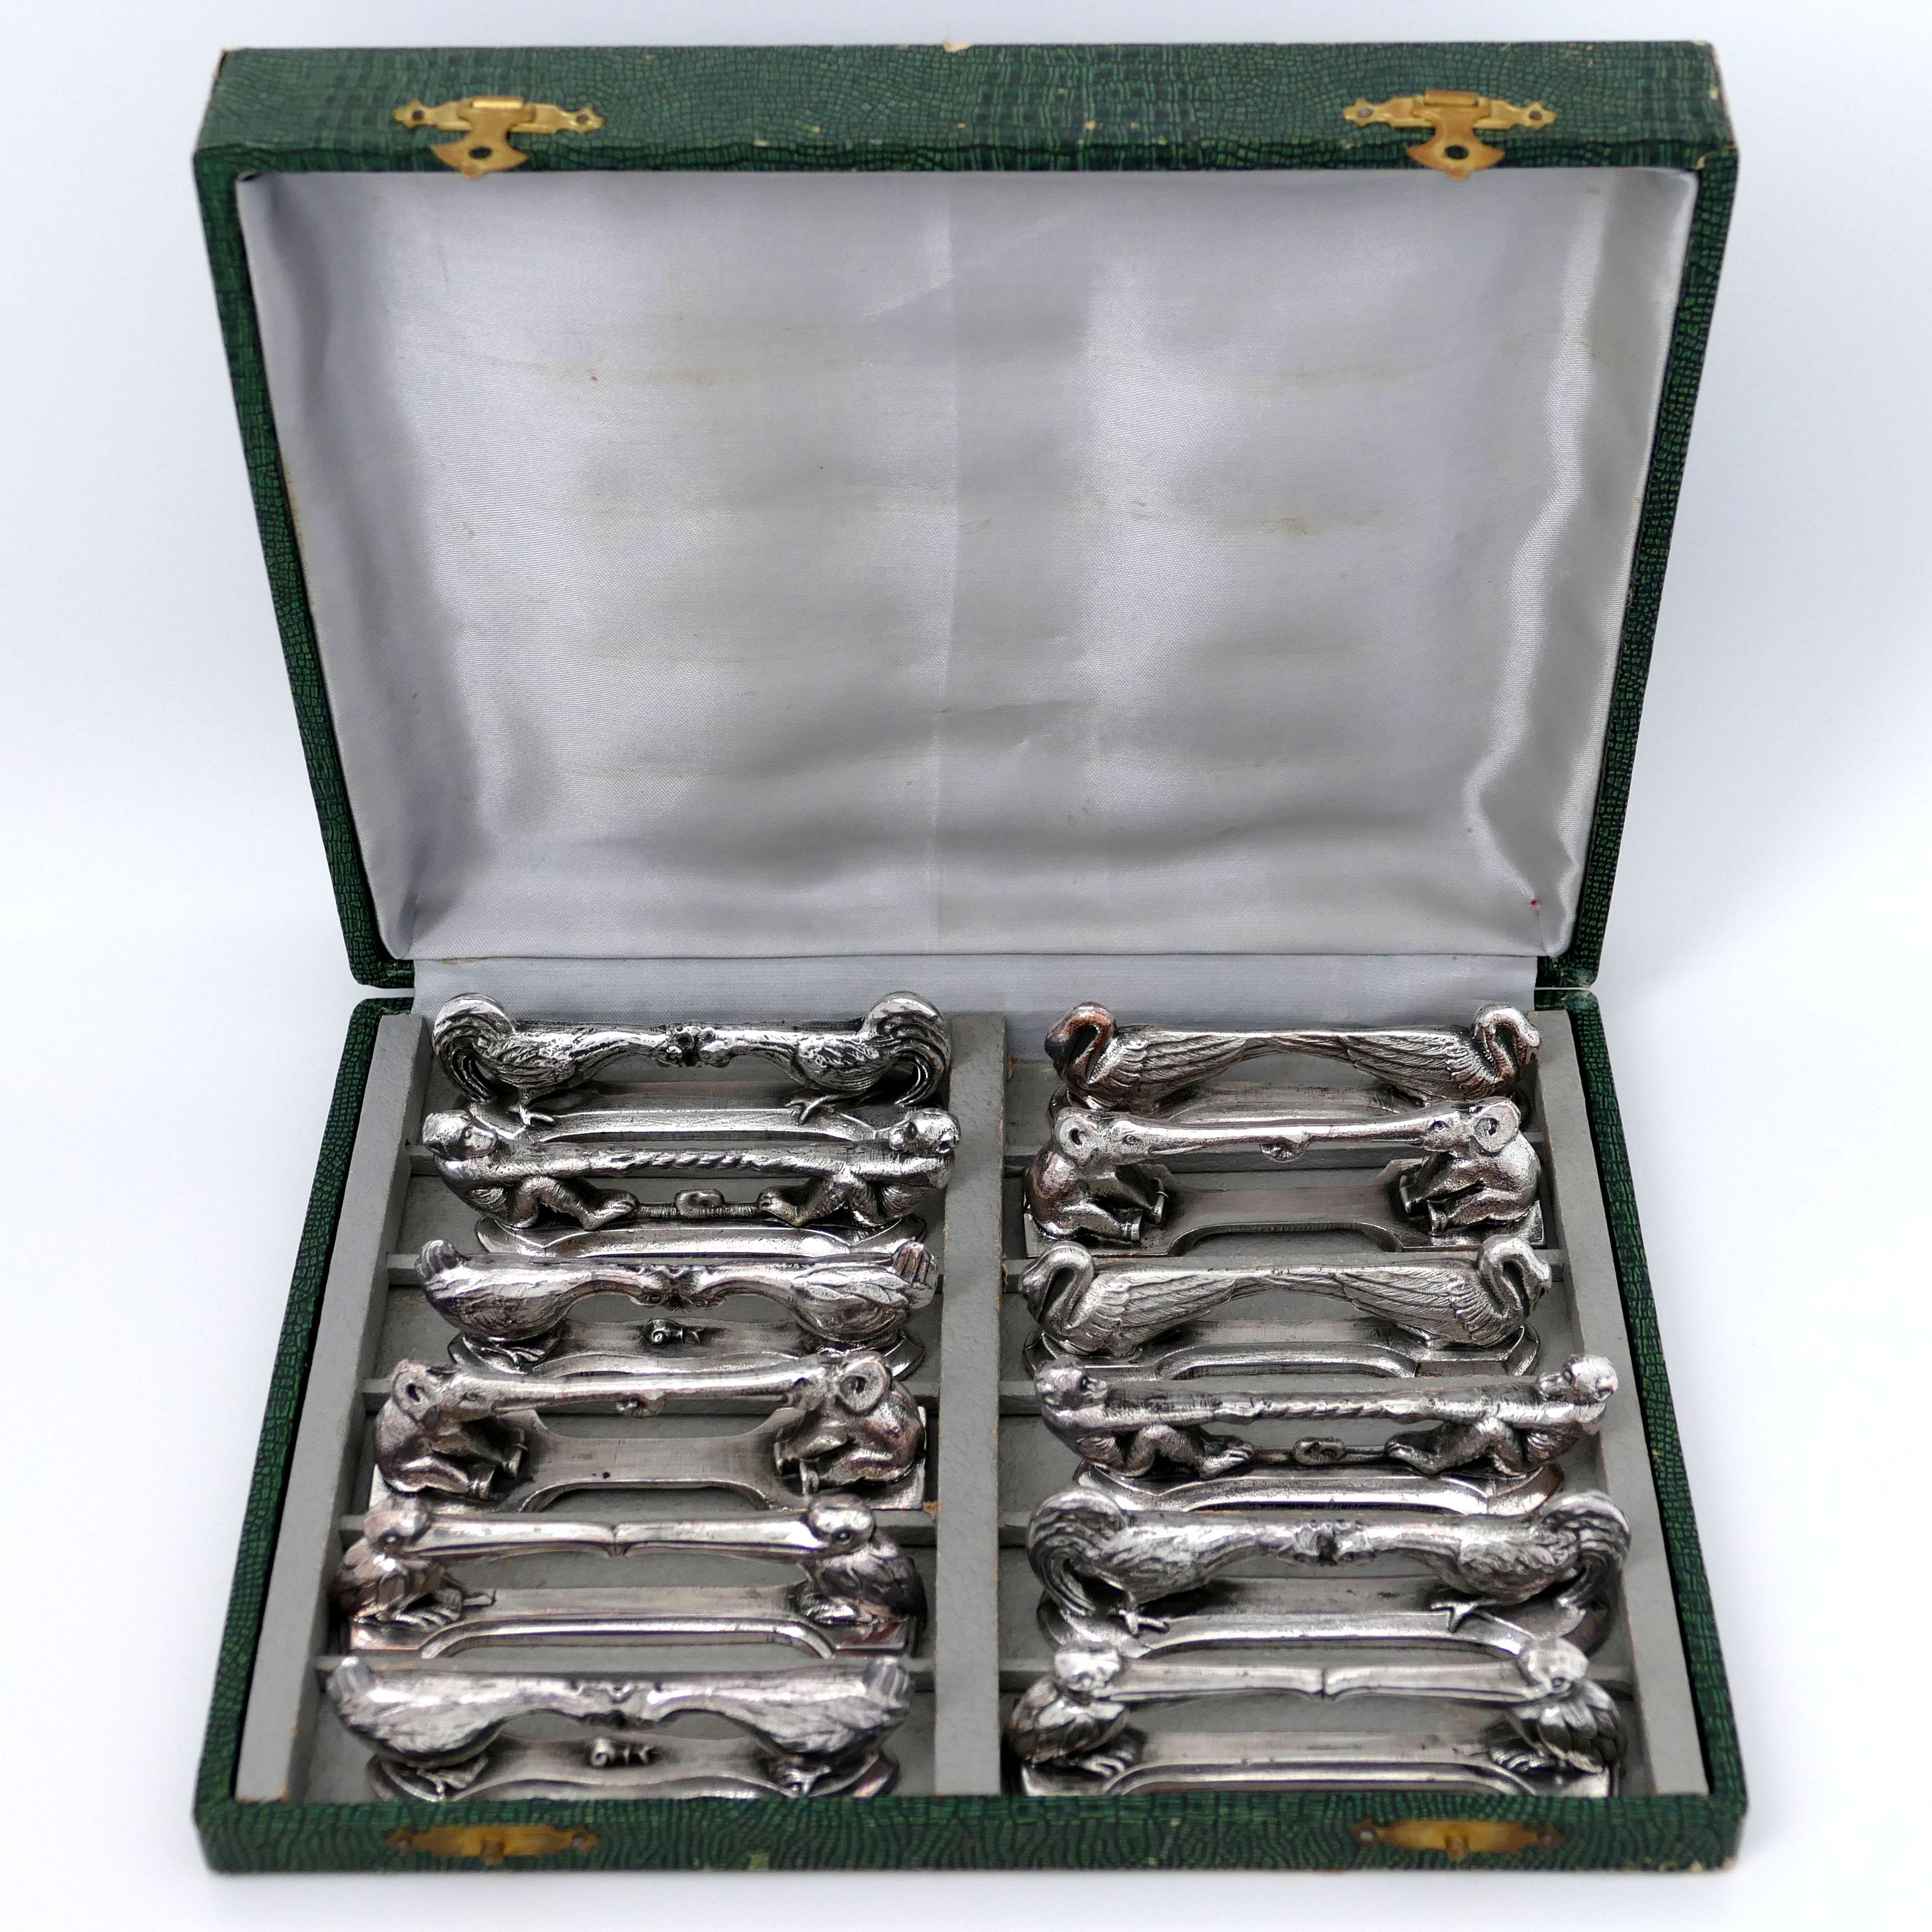 Rare set of twelve silver plate knife-rests in the shape of different animals: two swans standing turning their backs, two monkeys pulling a rope while standing by the tail, two cocks fighting each other, two hens clashing over a snail, two